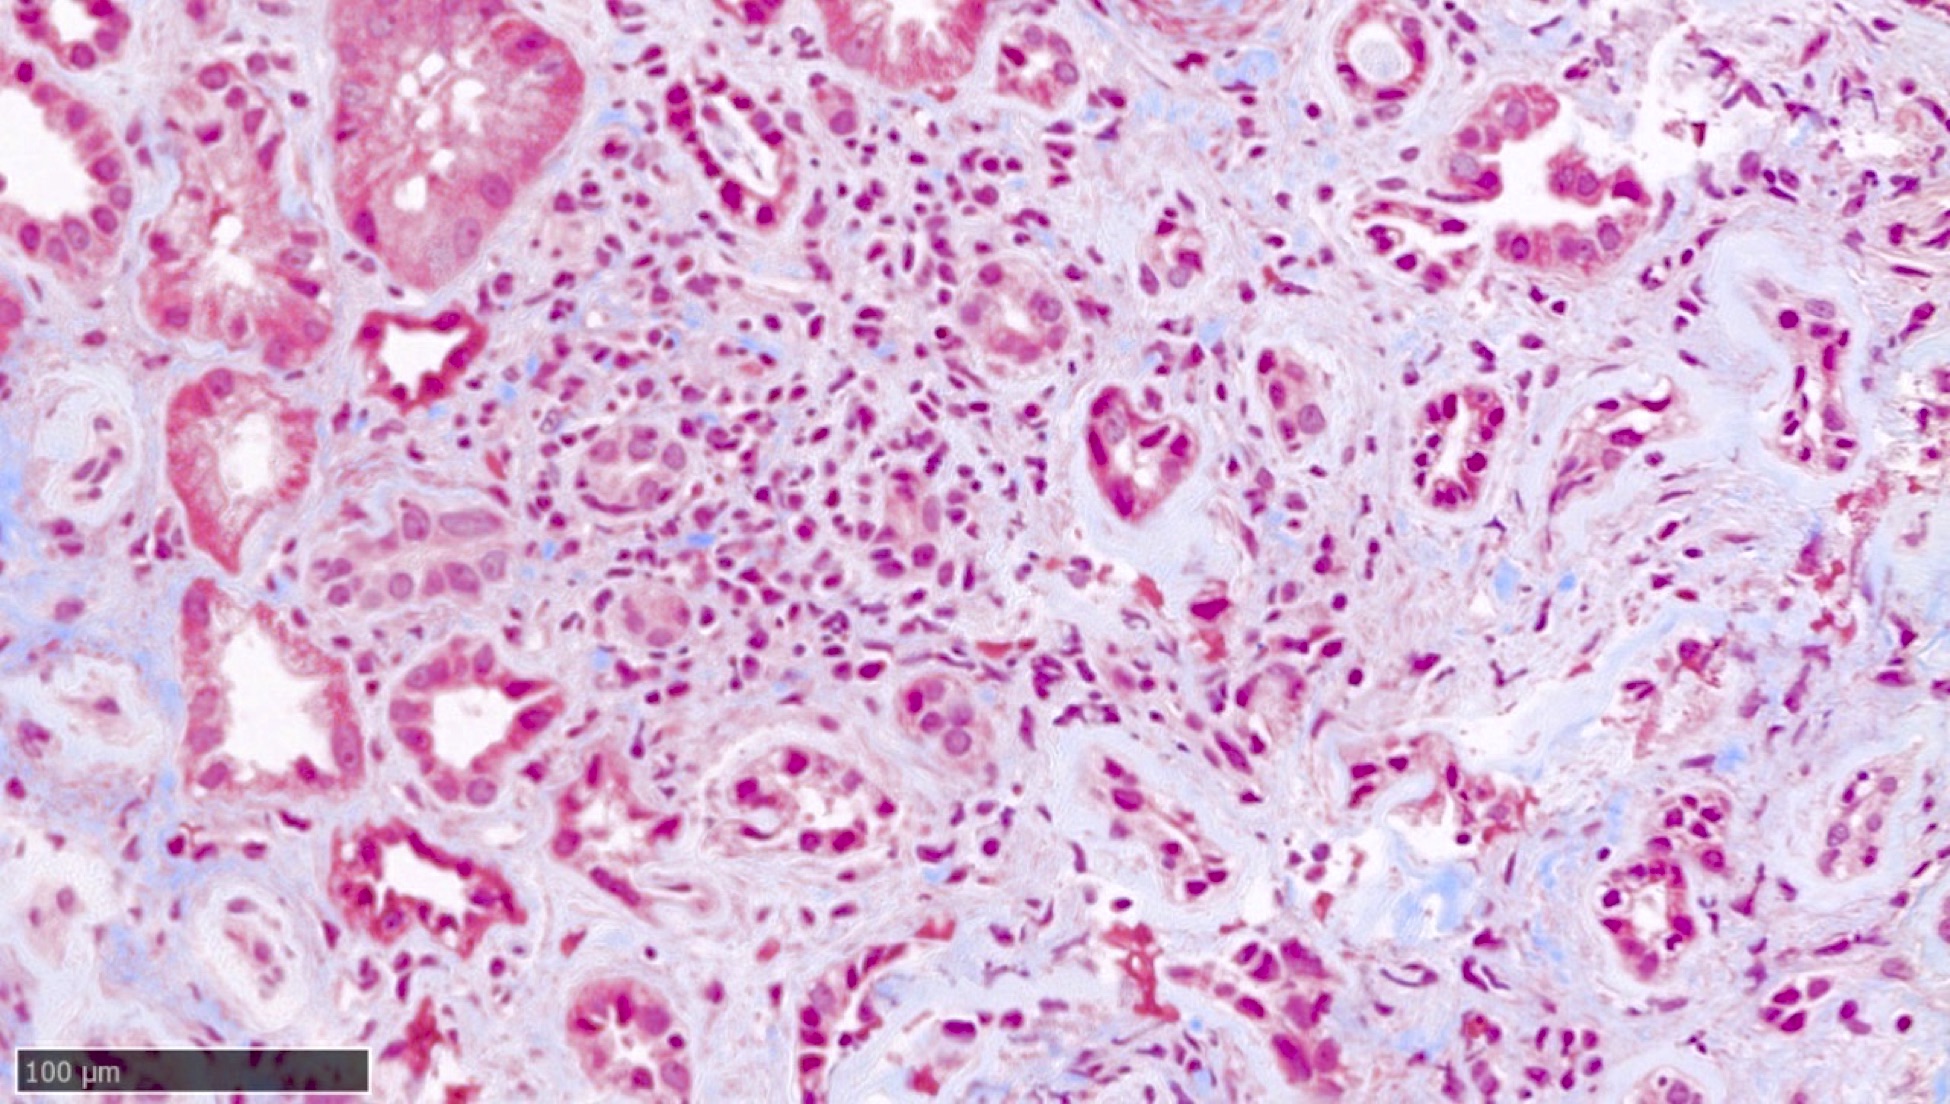 Renal cortical parenchyma with tubular atrophy and interstitial fibrosis, Masson Trichrome special stain 